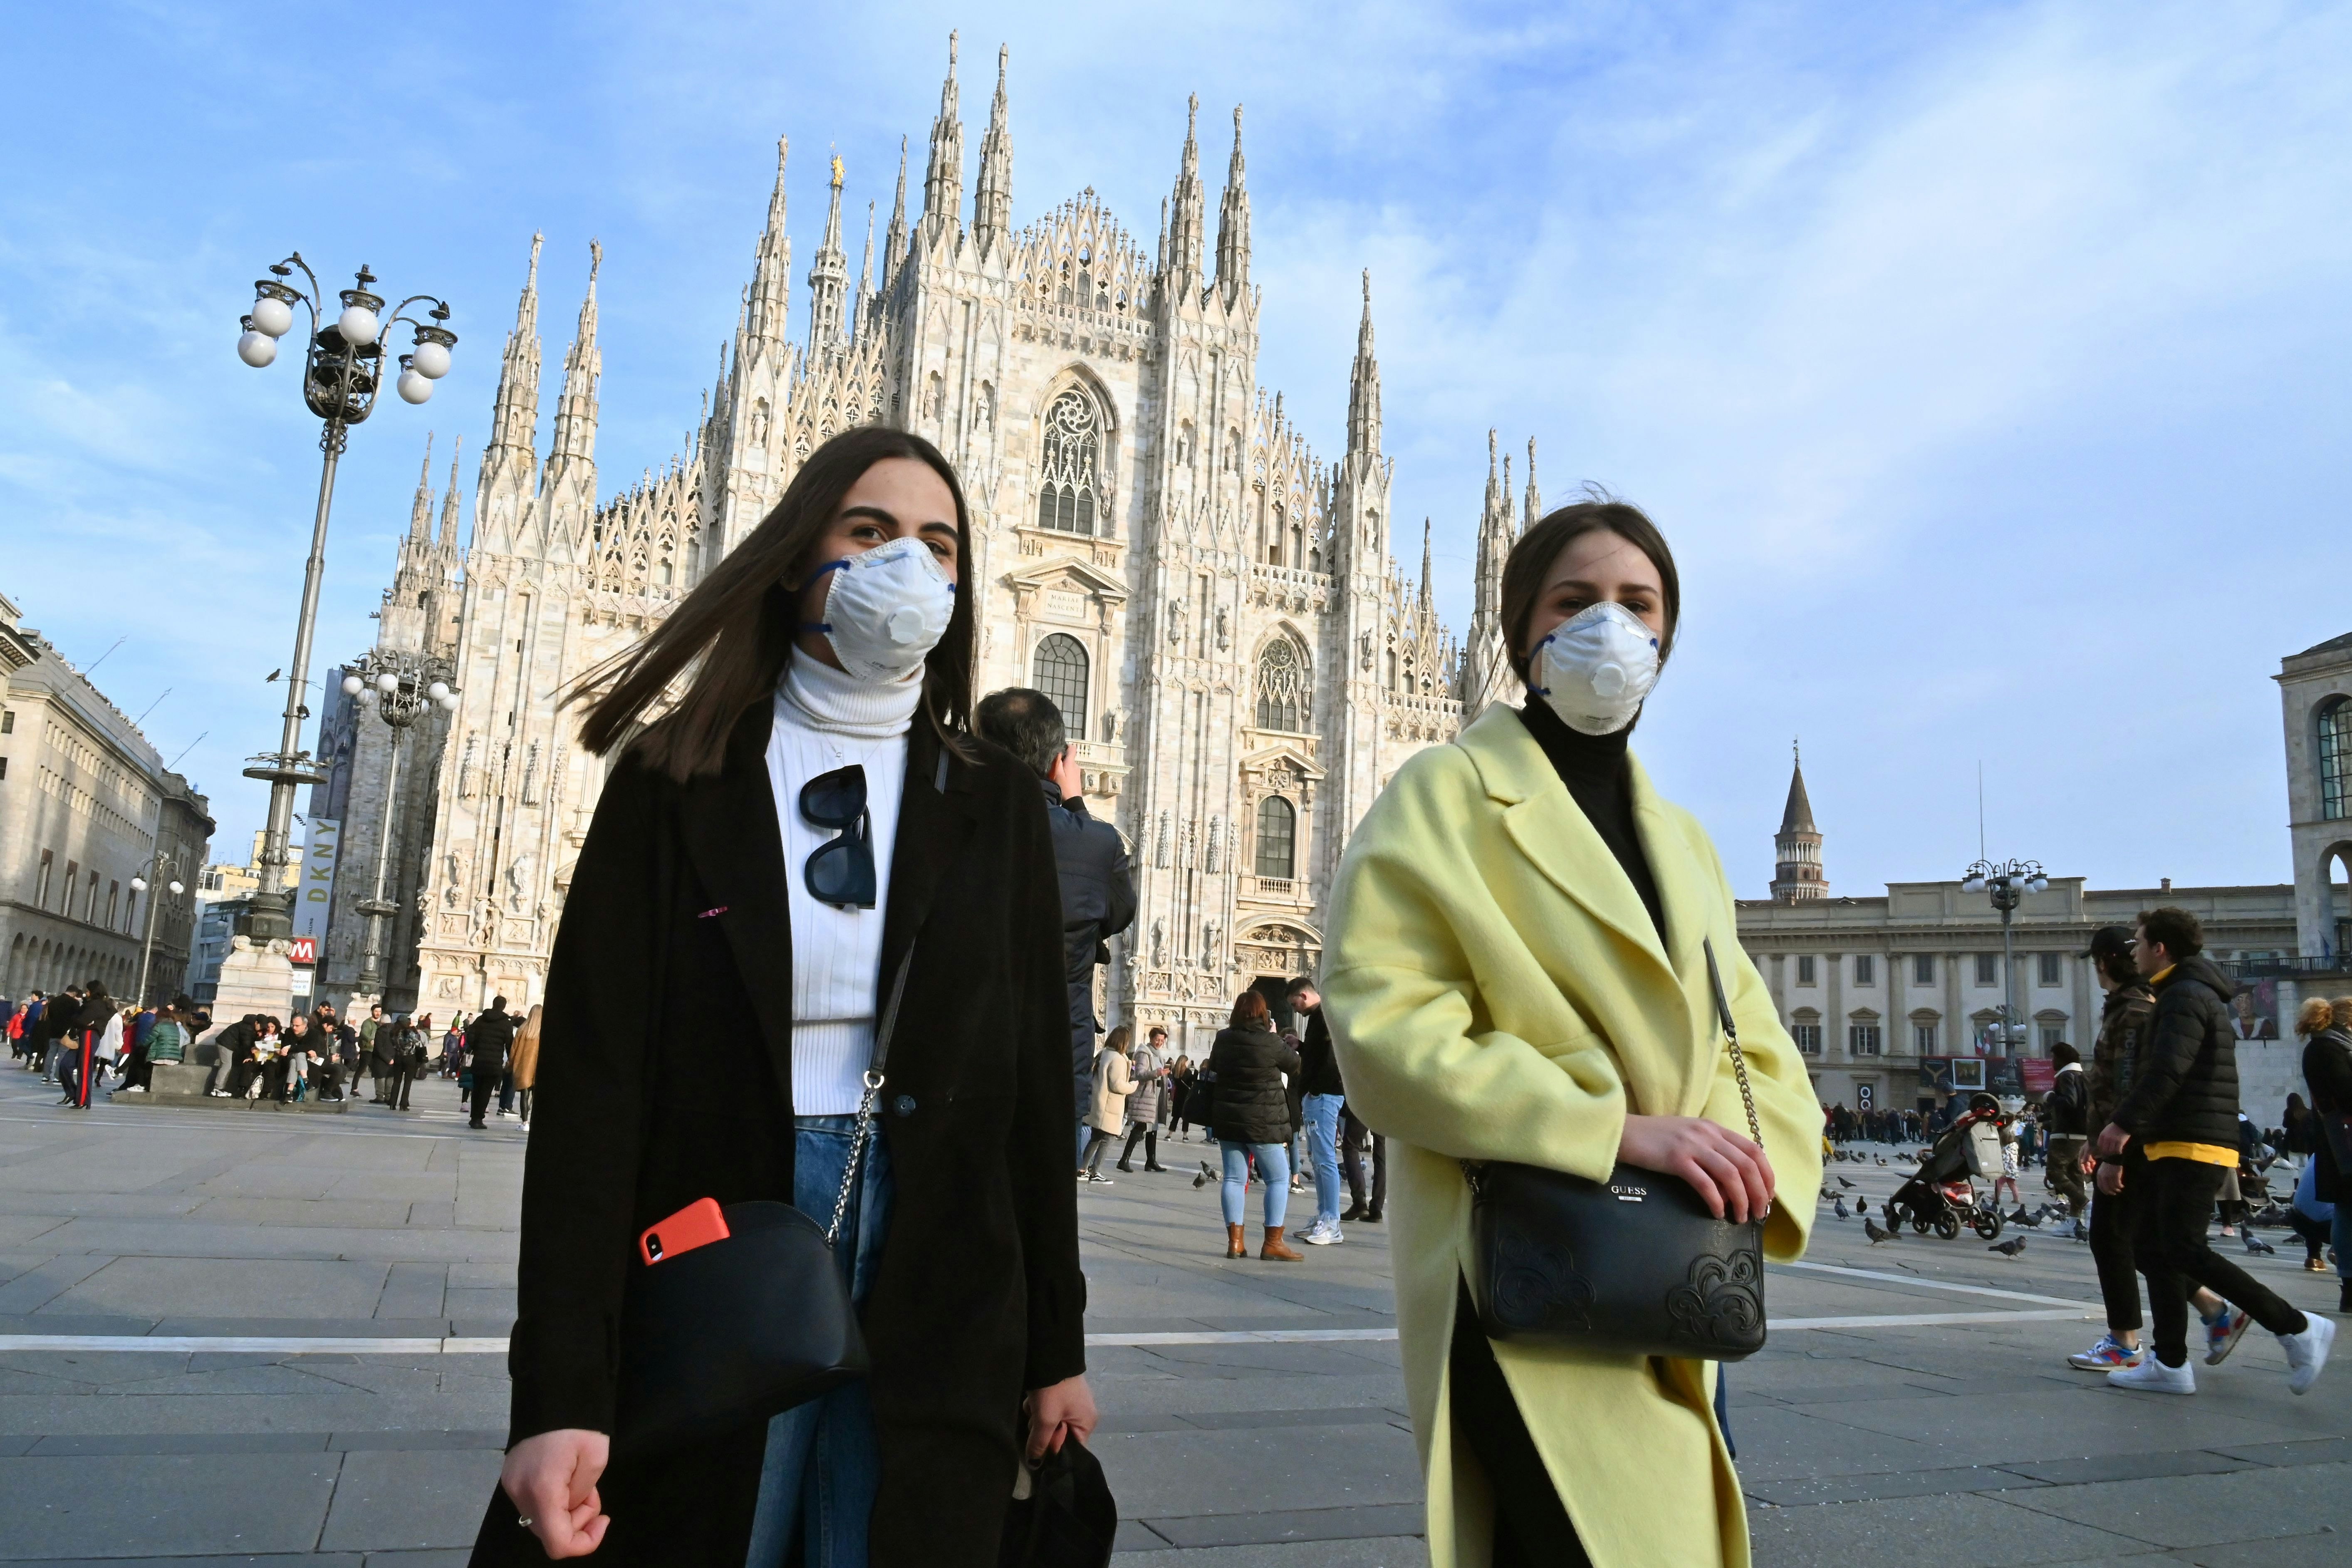 Women wearing face masks walk across Piazza del Duomo in central Milan during the COVID-19 pandemic.